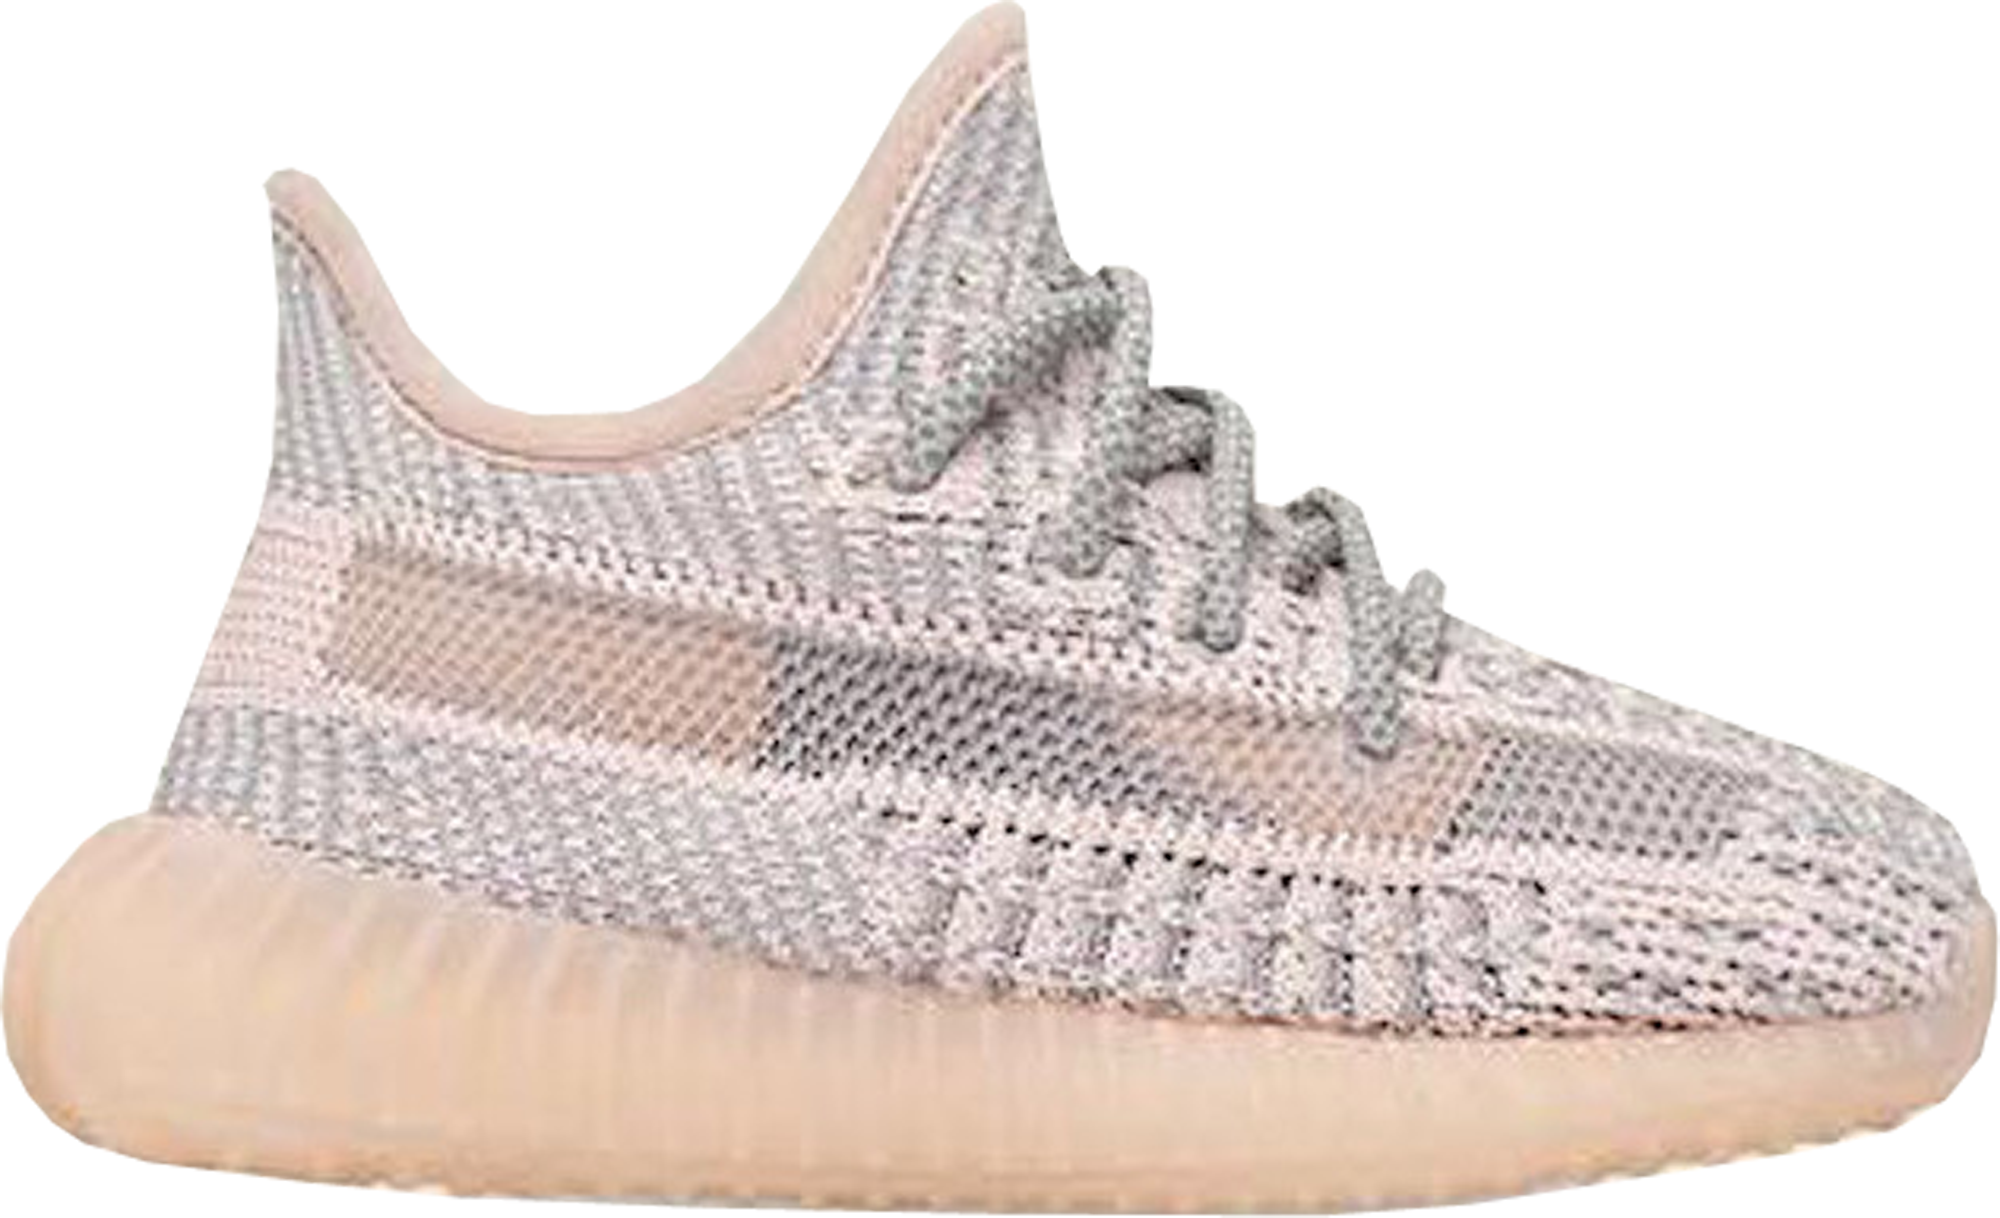 synth yeezy boost 350 v2